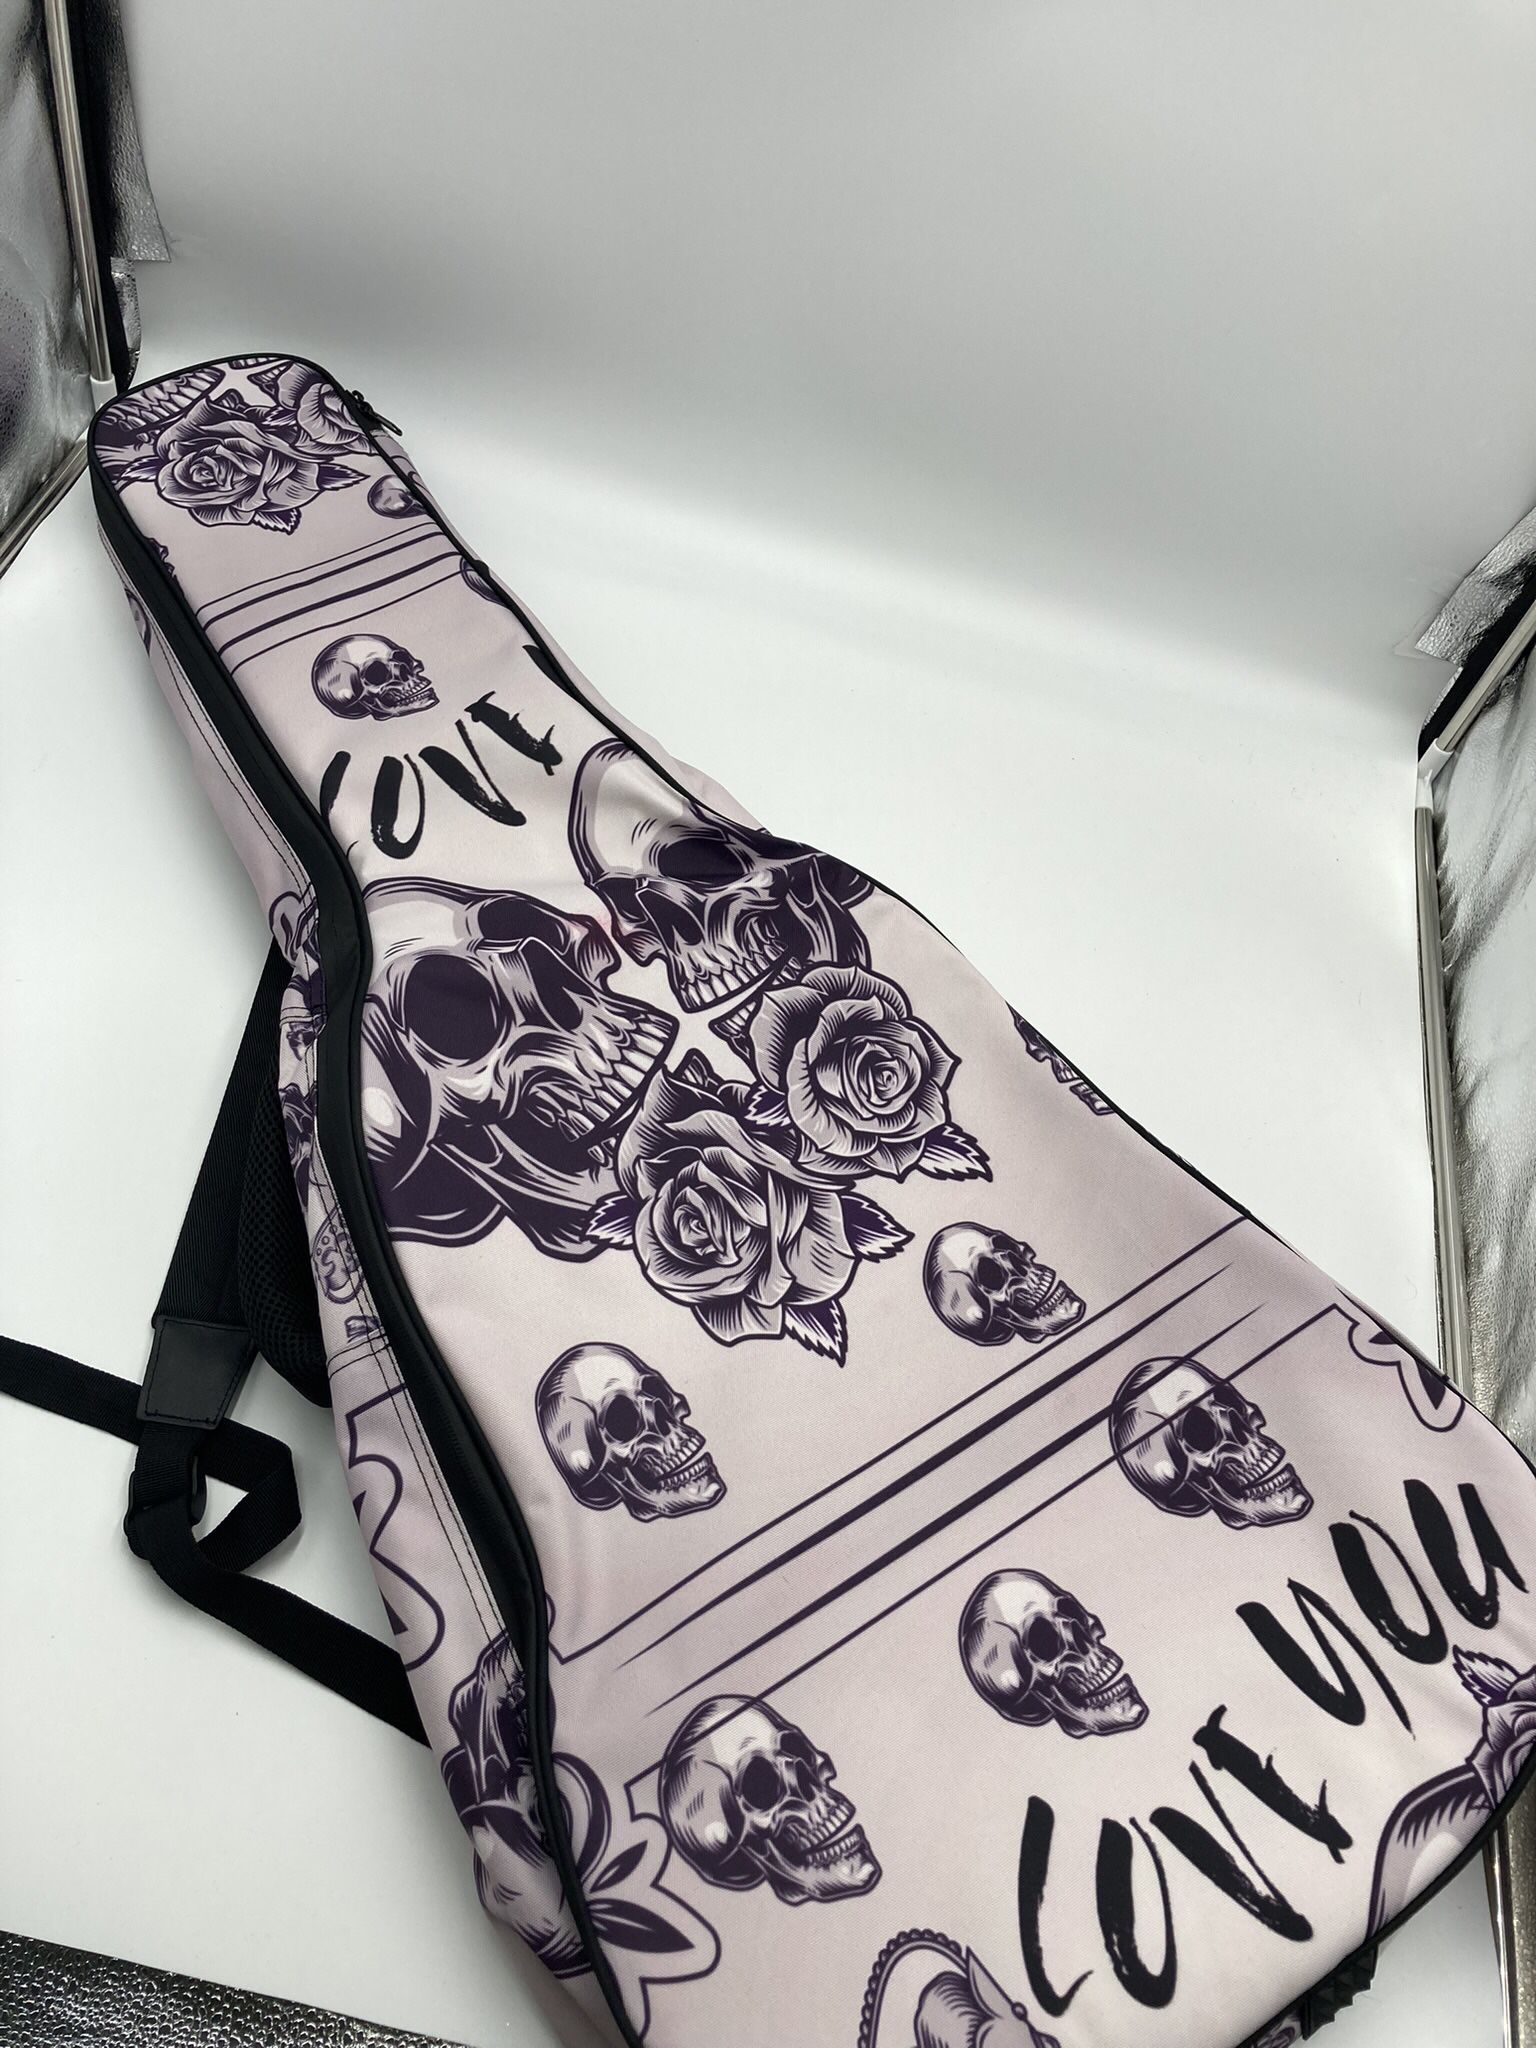 Imobaby  Skull and Flowers Acoustic Guitar Bag *Brand New*